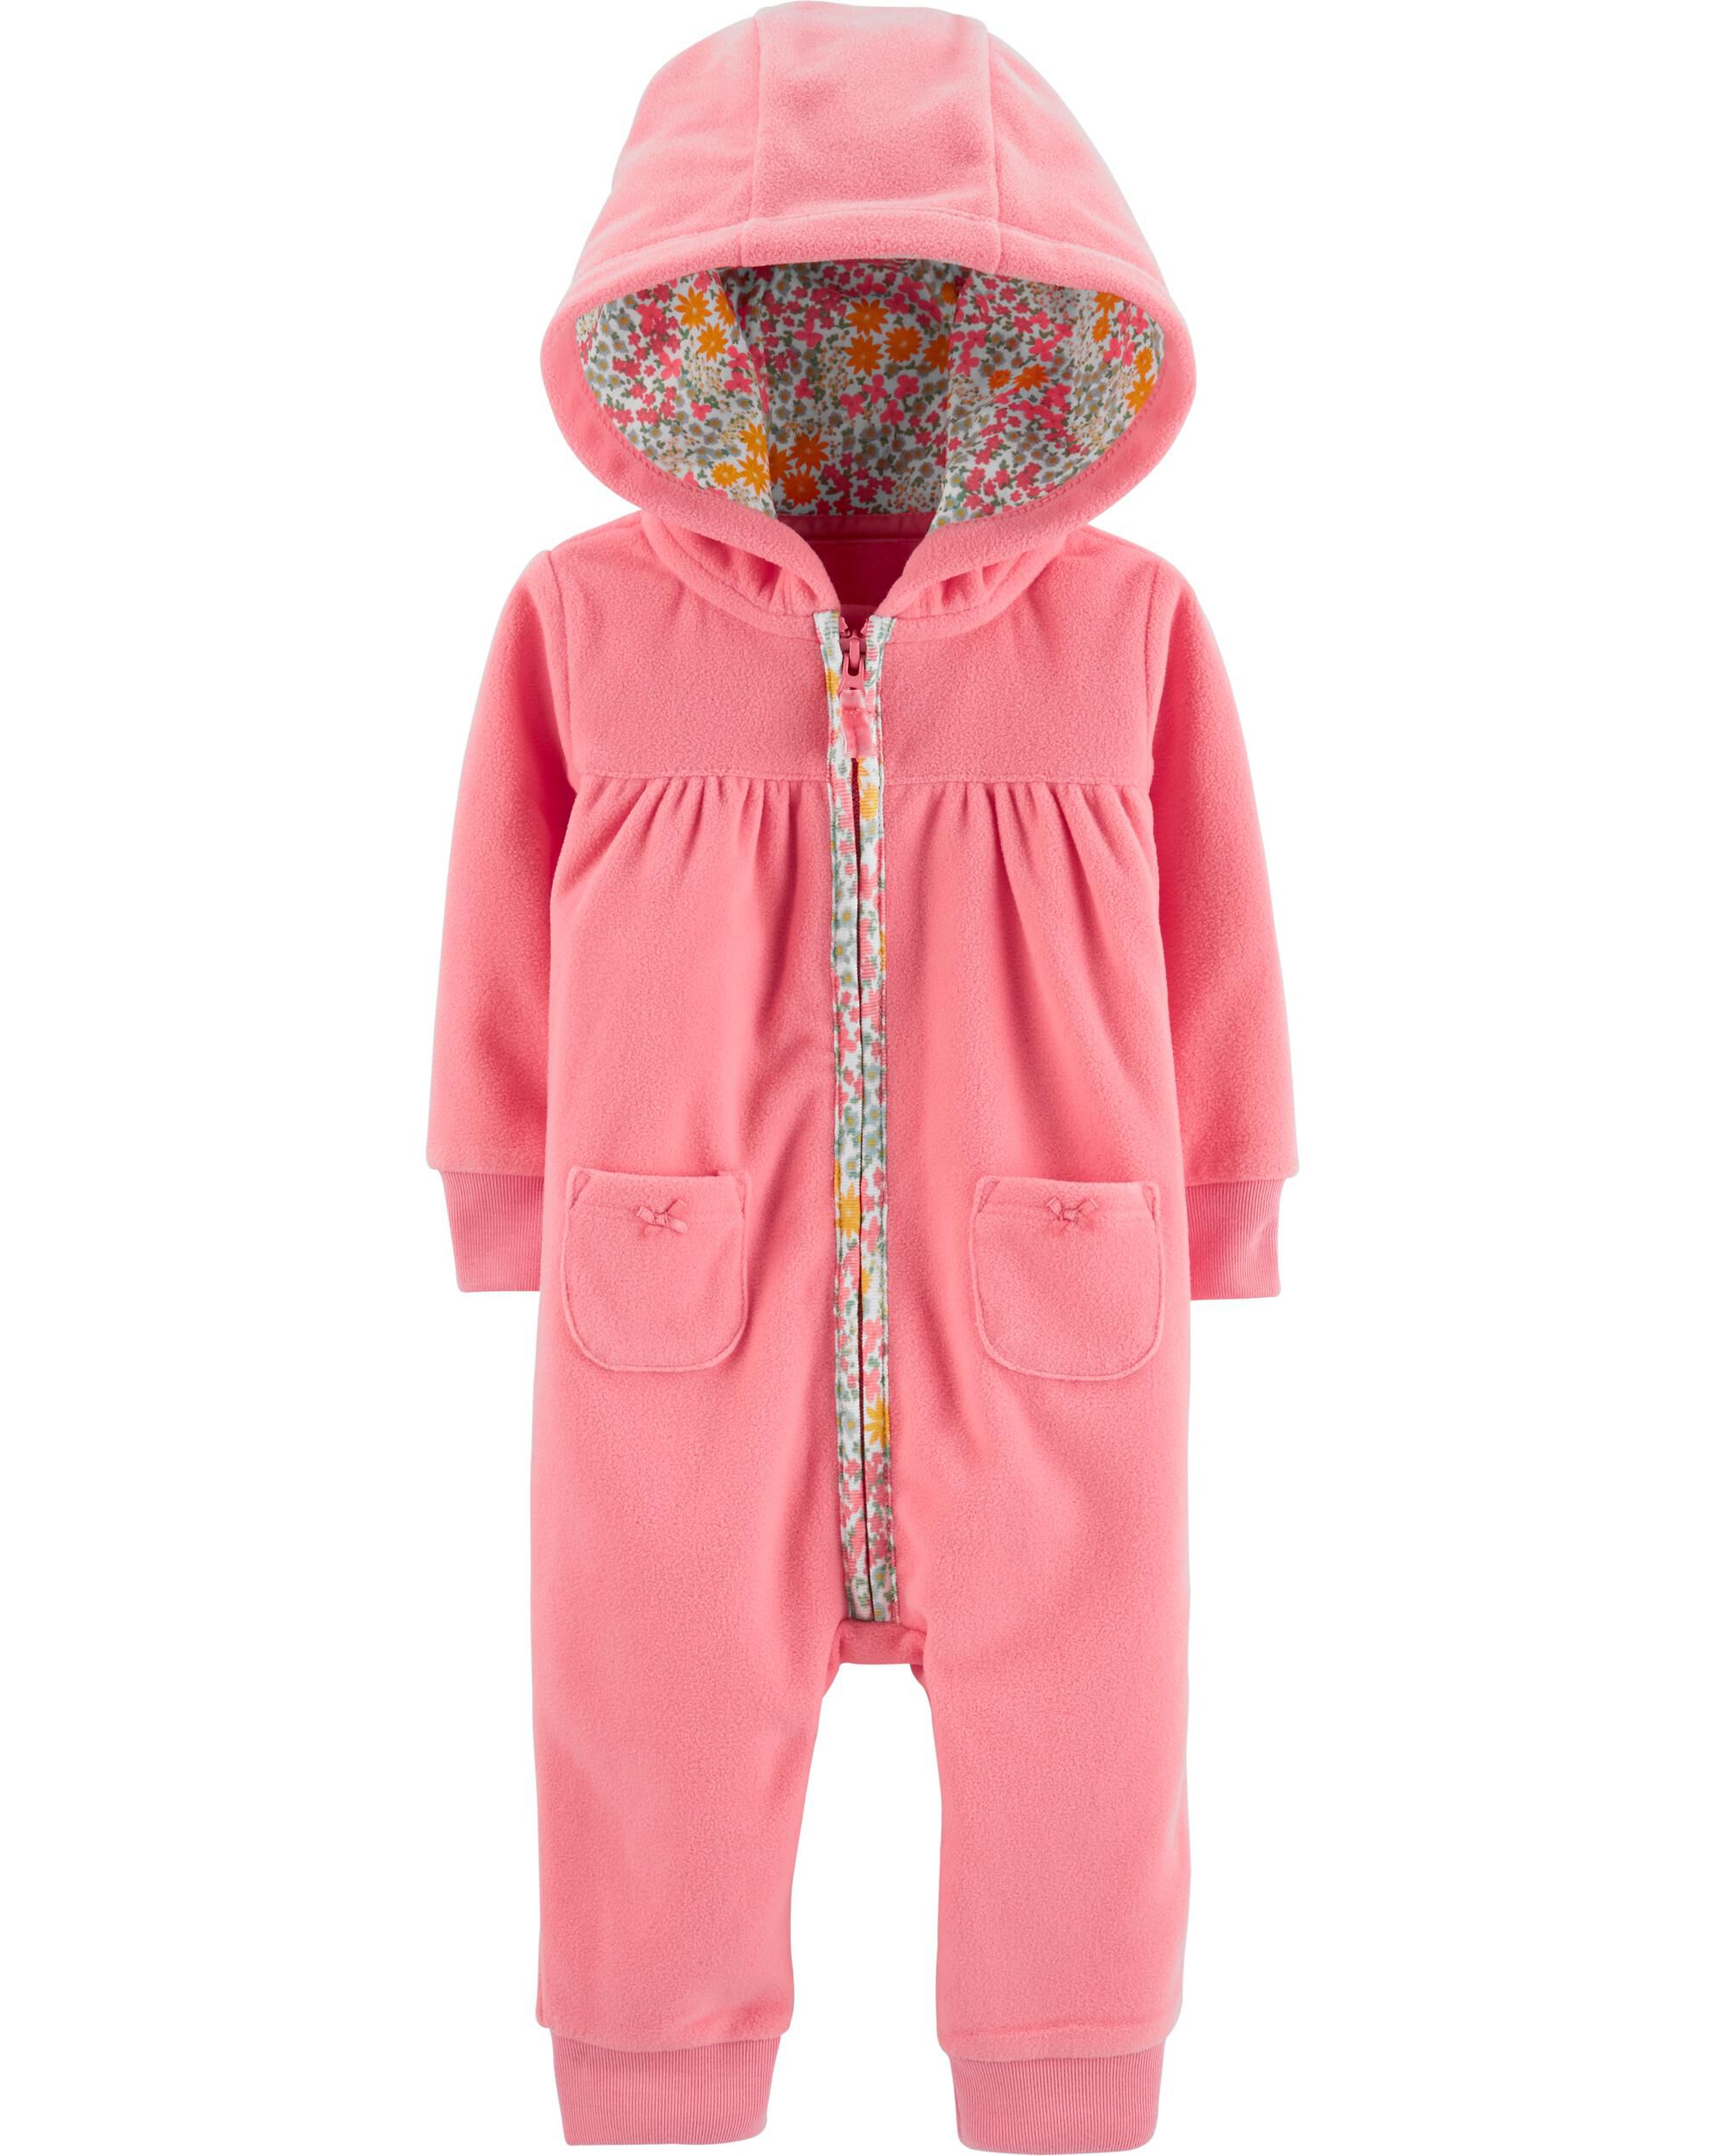  *CLEARANCE* Hooded Bear Jumpsuit 